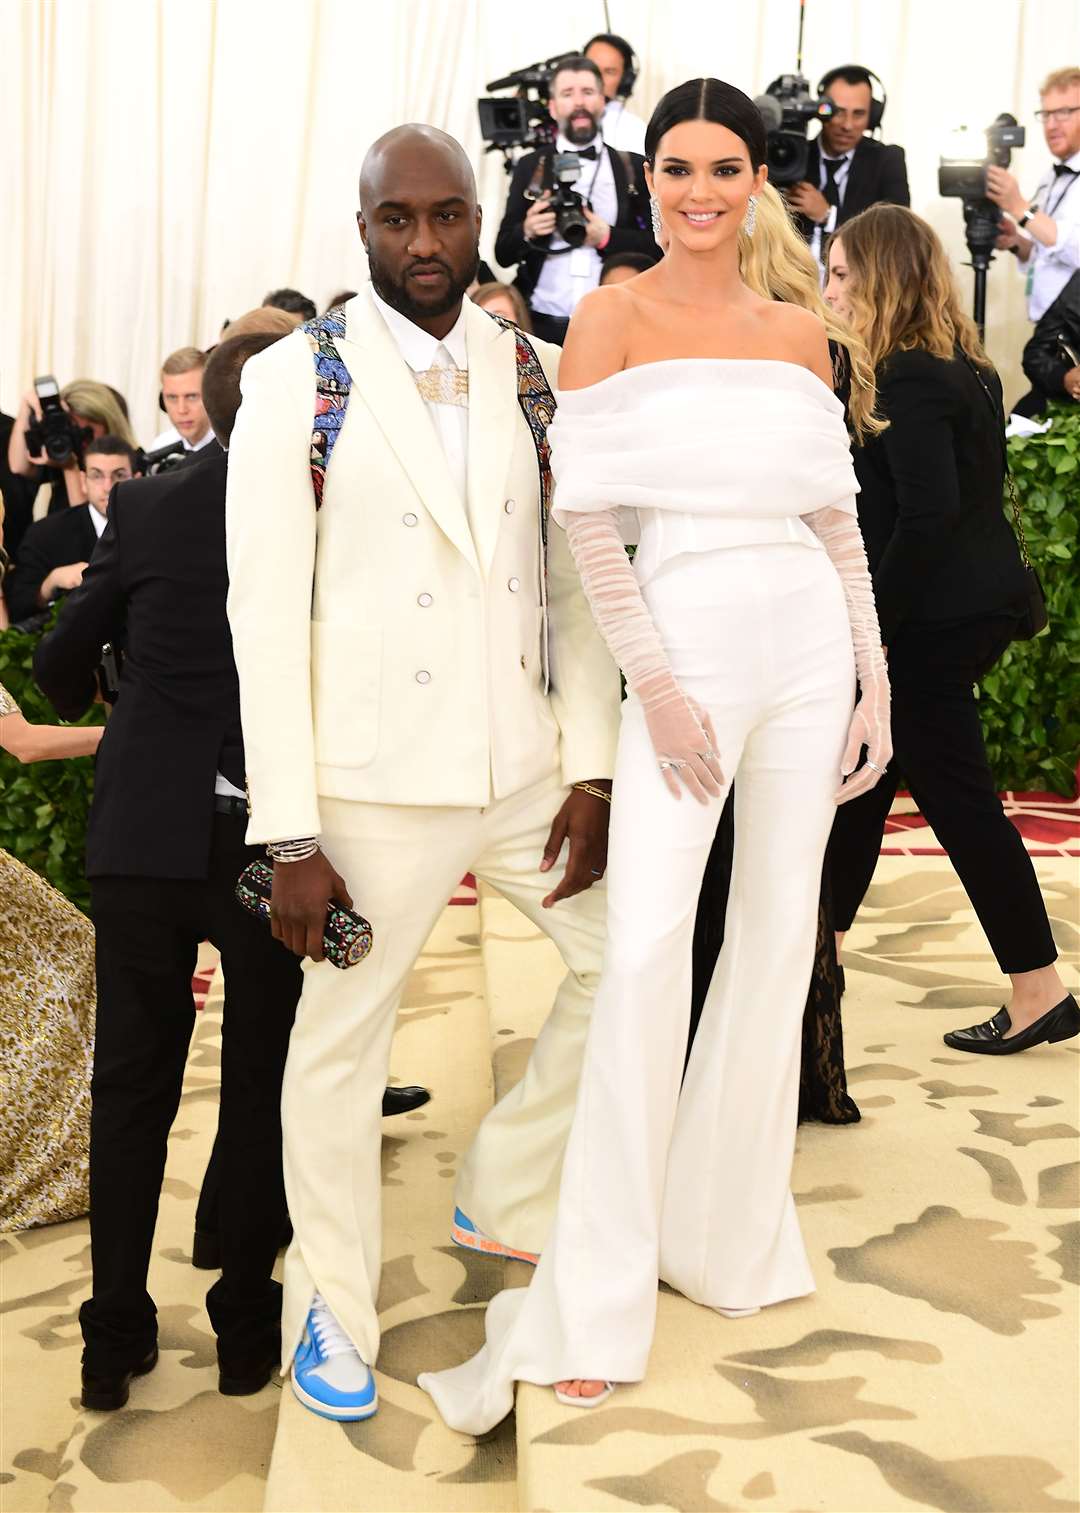 Virgil Abloh with Kendall Jenner at the Met Gala (Ian West/PA)